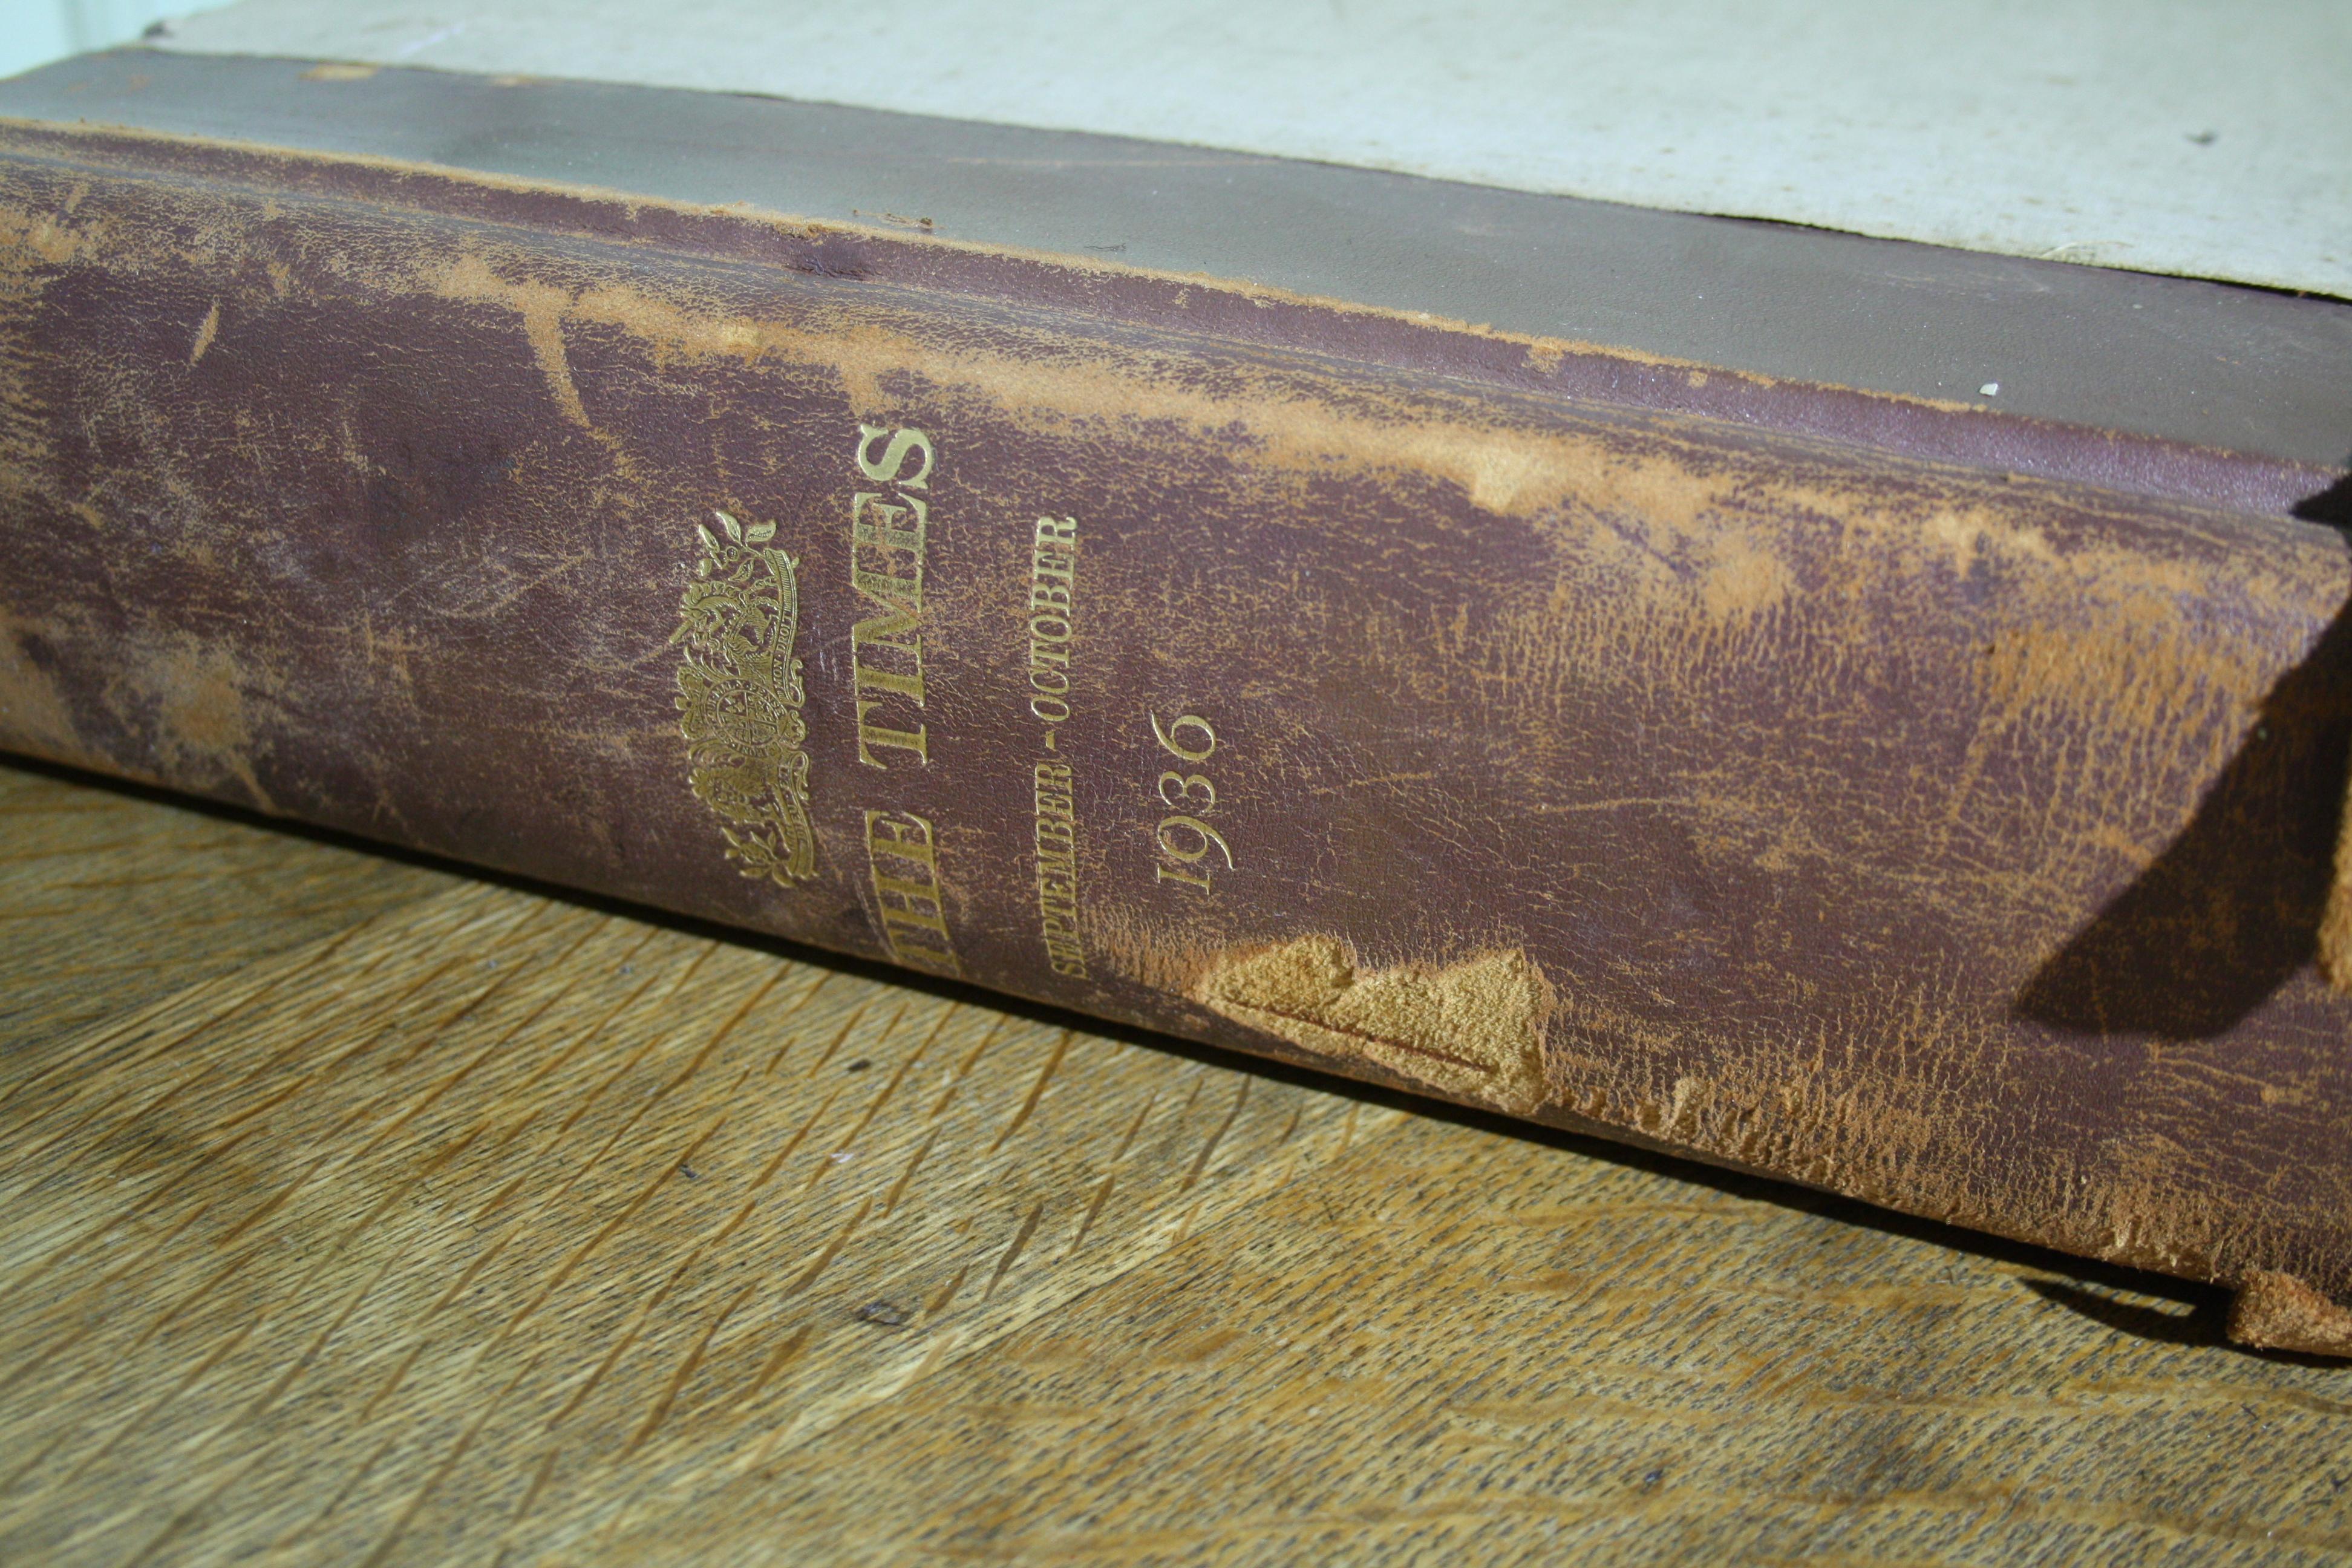 Leather Bound Royal Edition of The Times Newspaper 1936 in Superb Condition For Sale 12